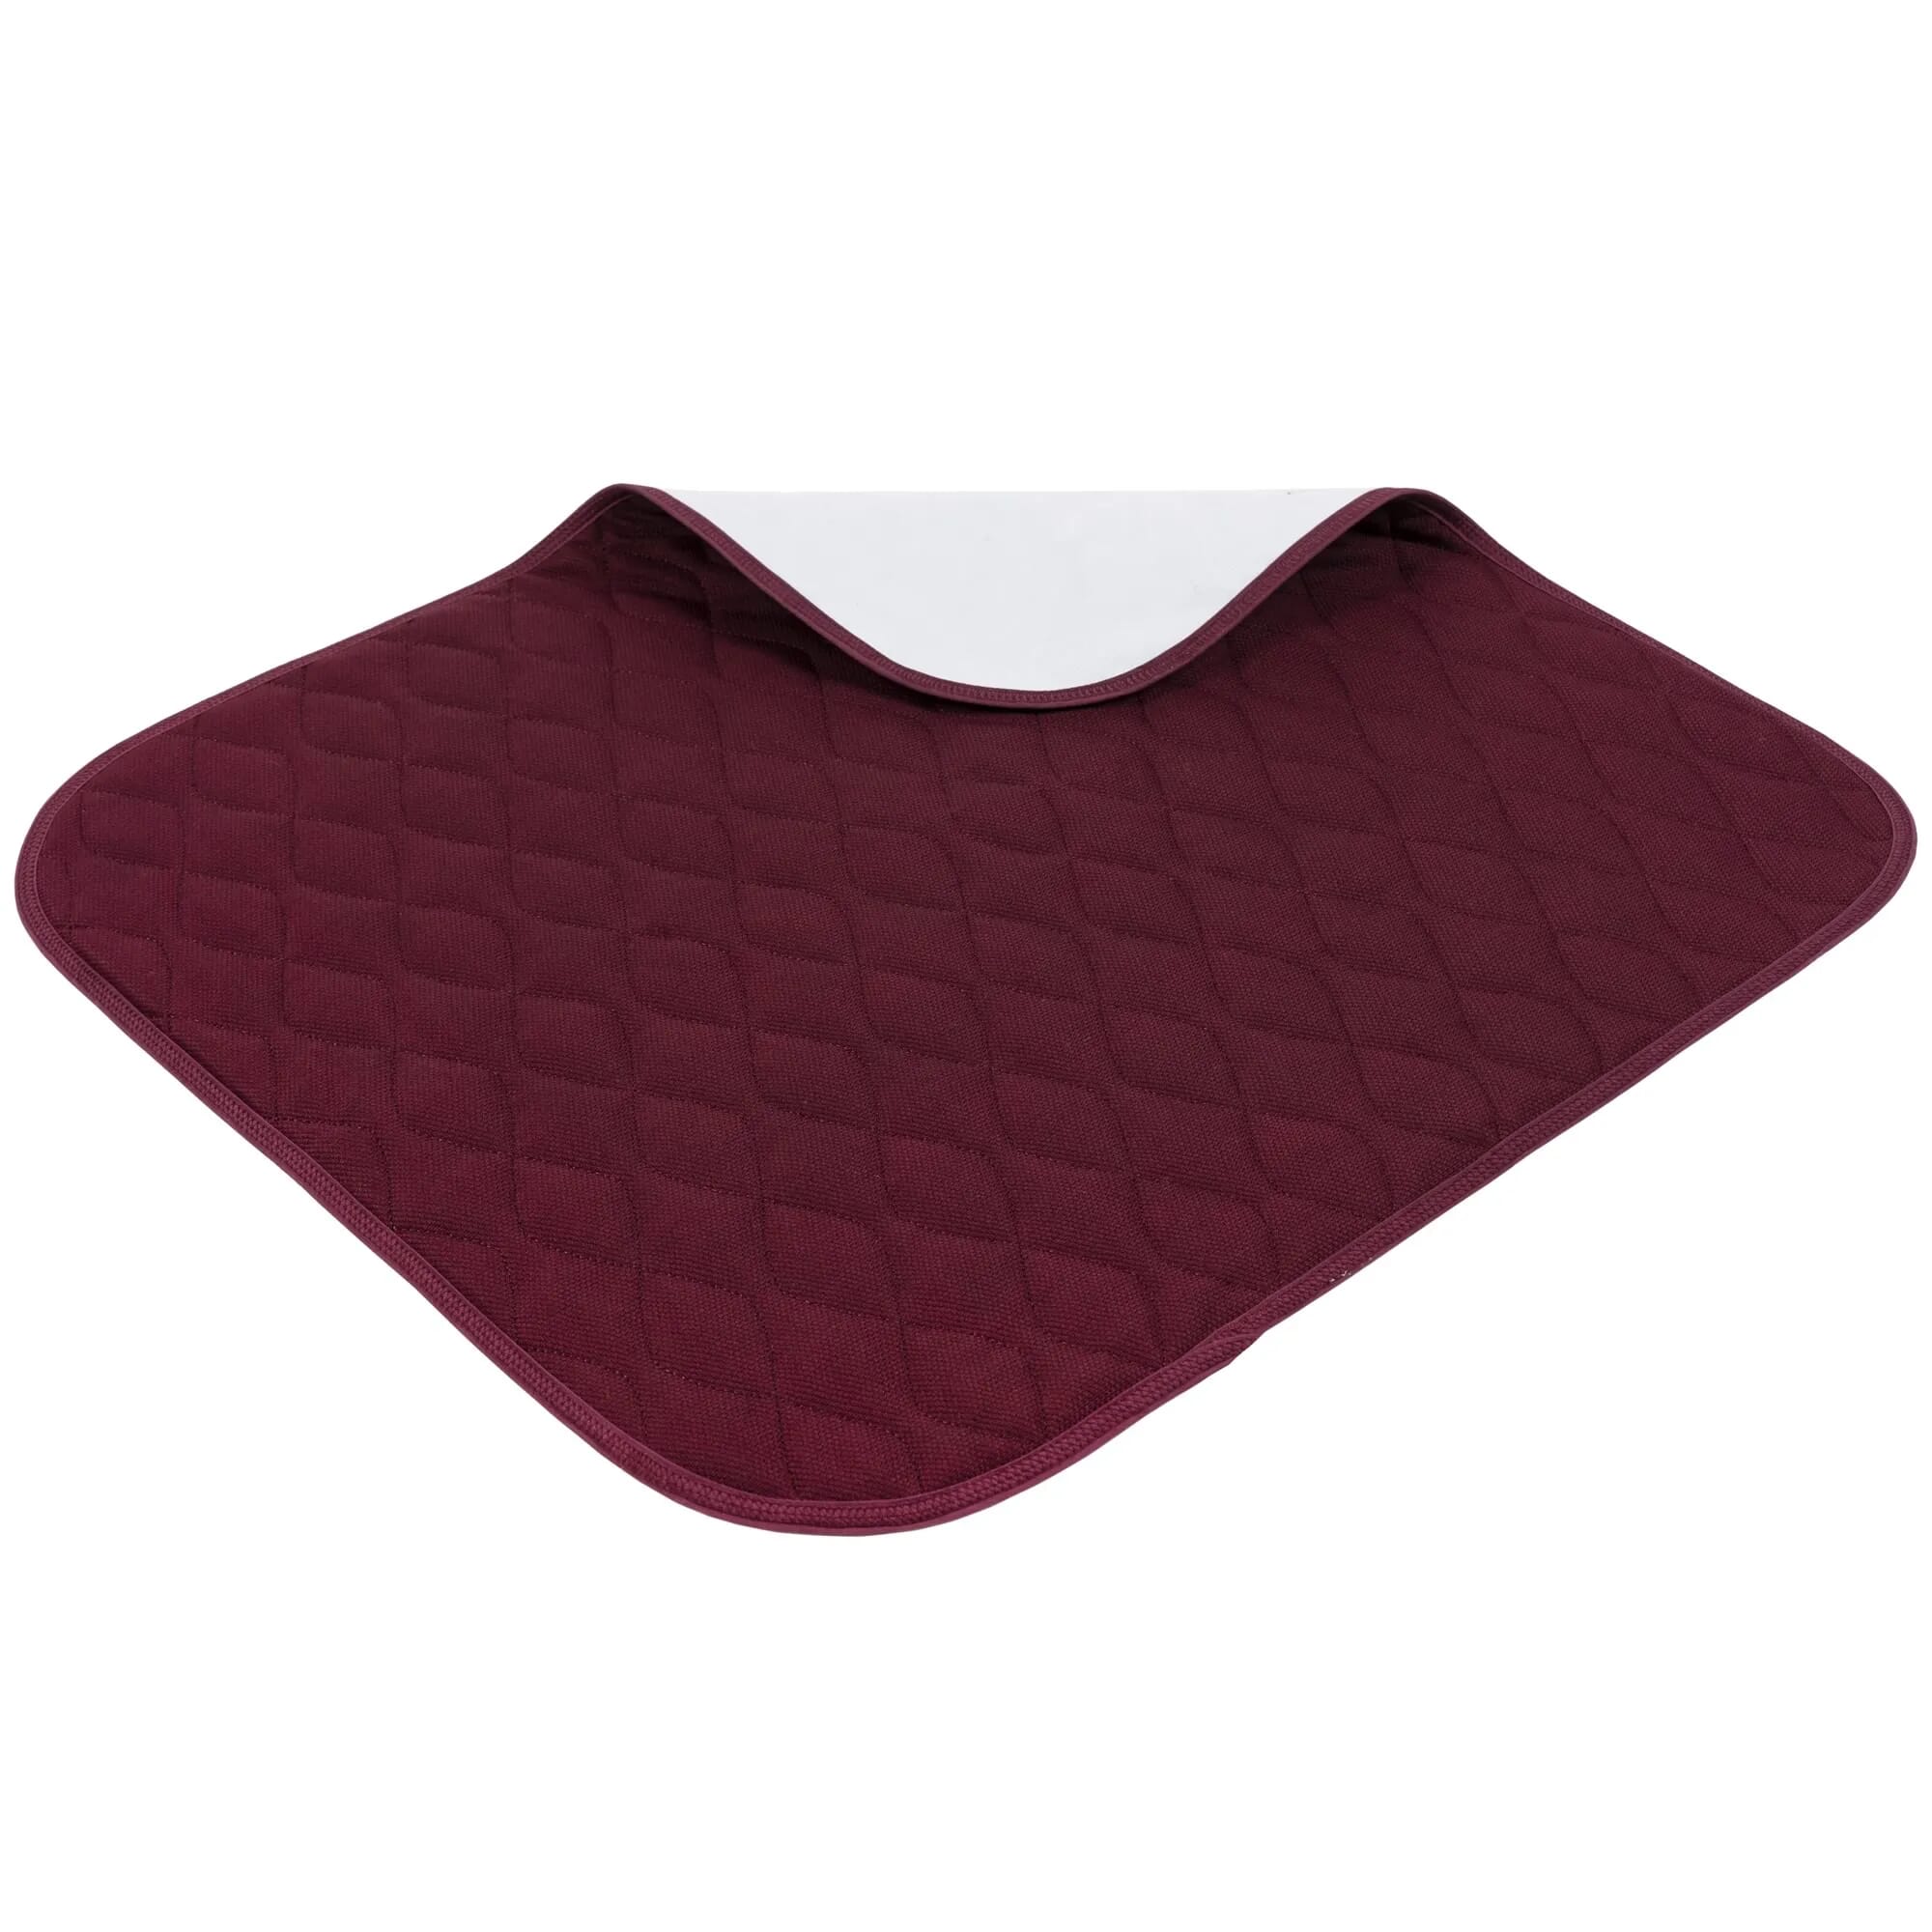 View Washable Chair Pads Red information